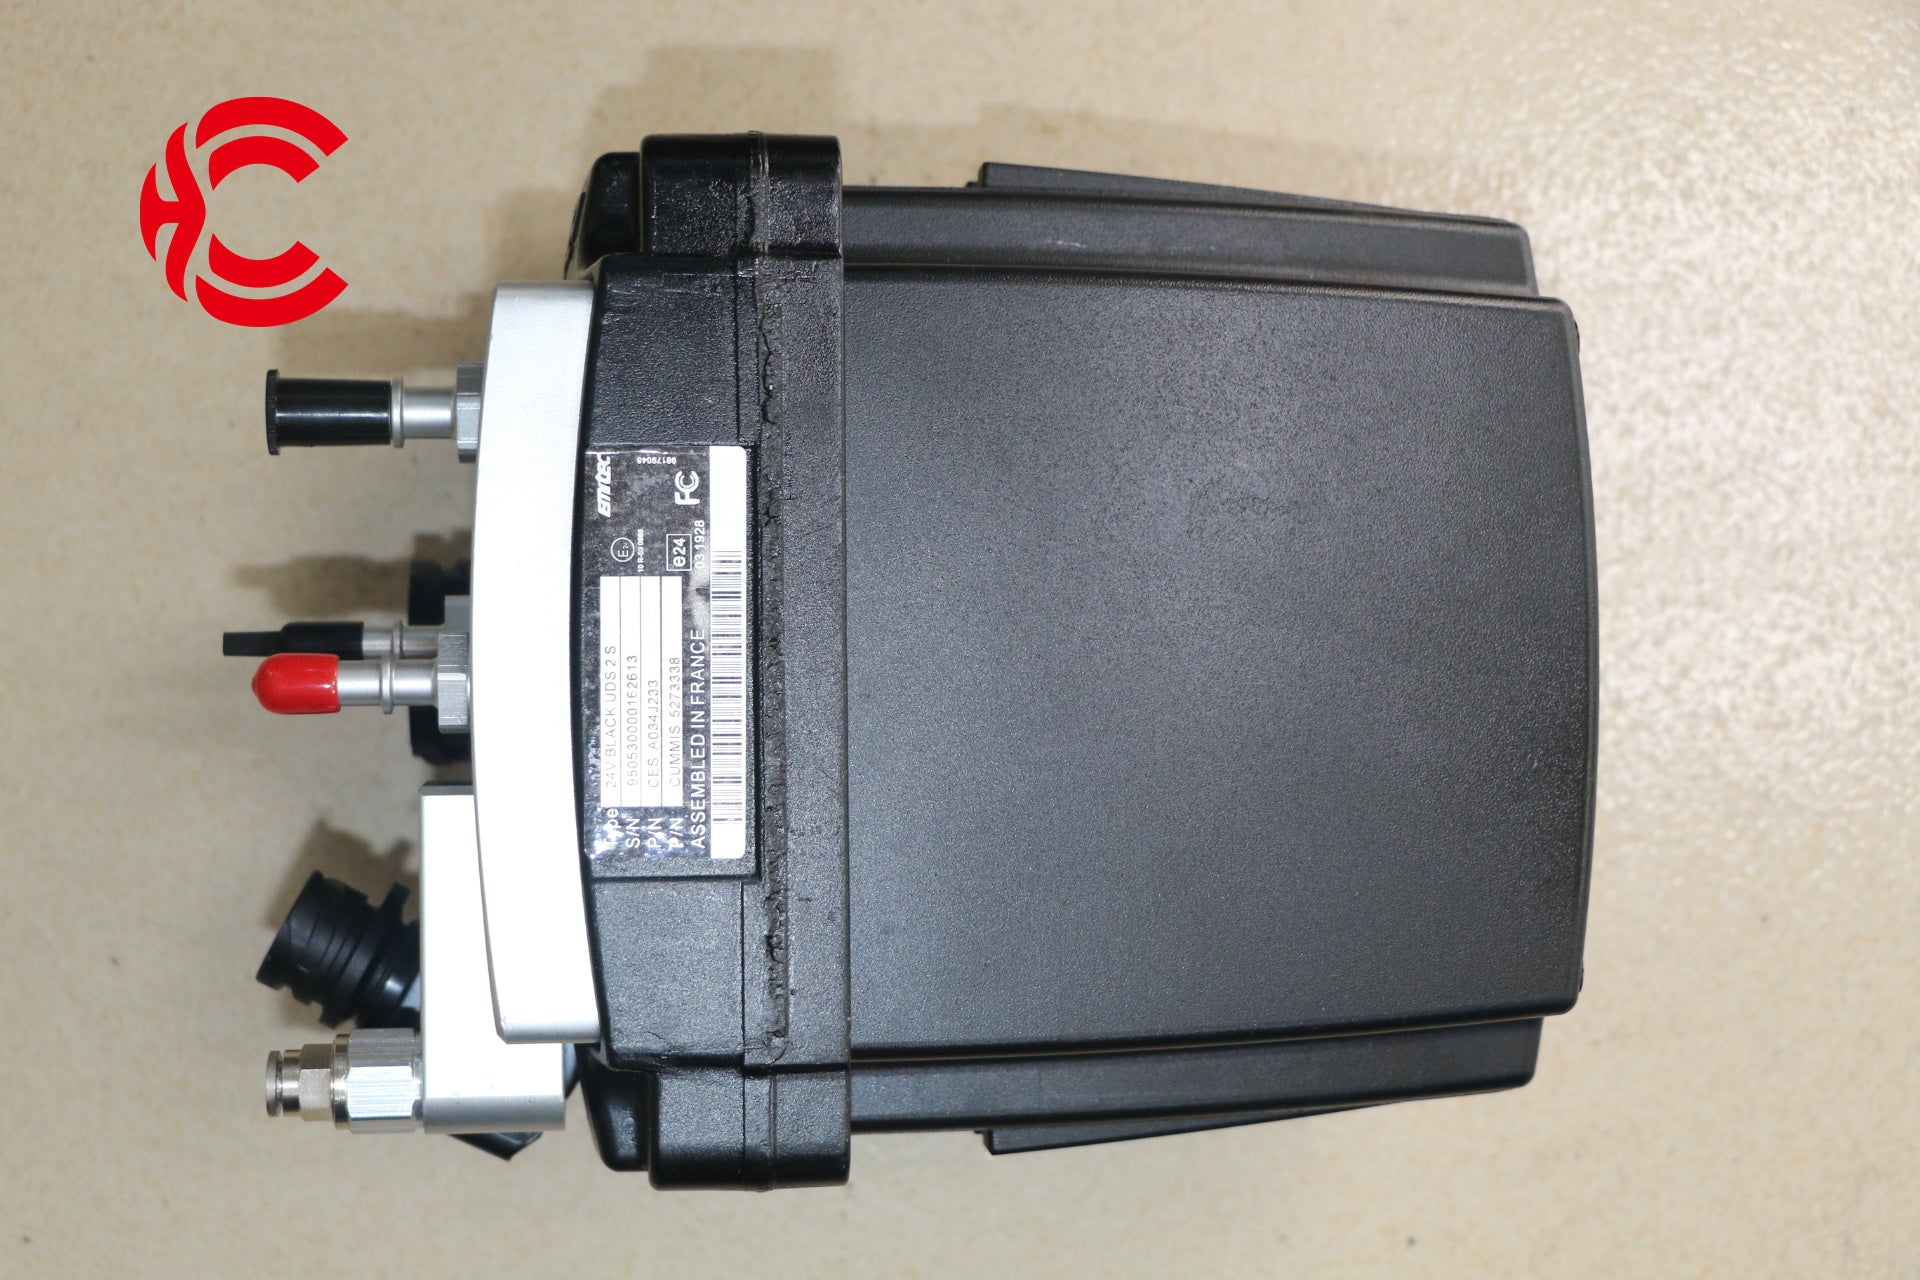 OEM: L4400-1205350A YC6L-S1200050 5273338Material: ABS metalColor: black silverOrigin: Made in ChinaWeight: 1000gPacking List: 1* Adblue Pump More ServiceWe can provide OEM Manufacturing serviceWe can Be your one-step solution for Auto PartsWe can provide technical scheme for you Feel Free to Contact Us, We will get back to you as soon as possible.